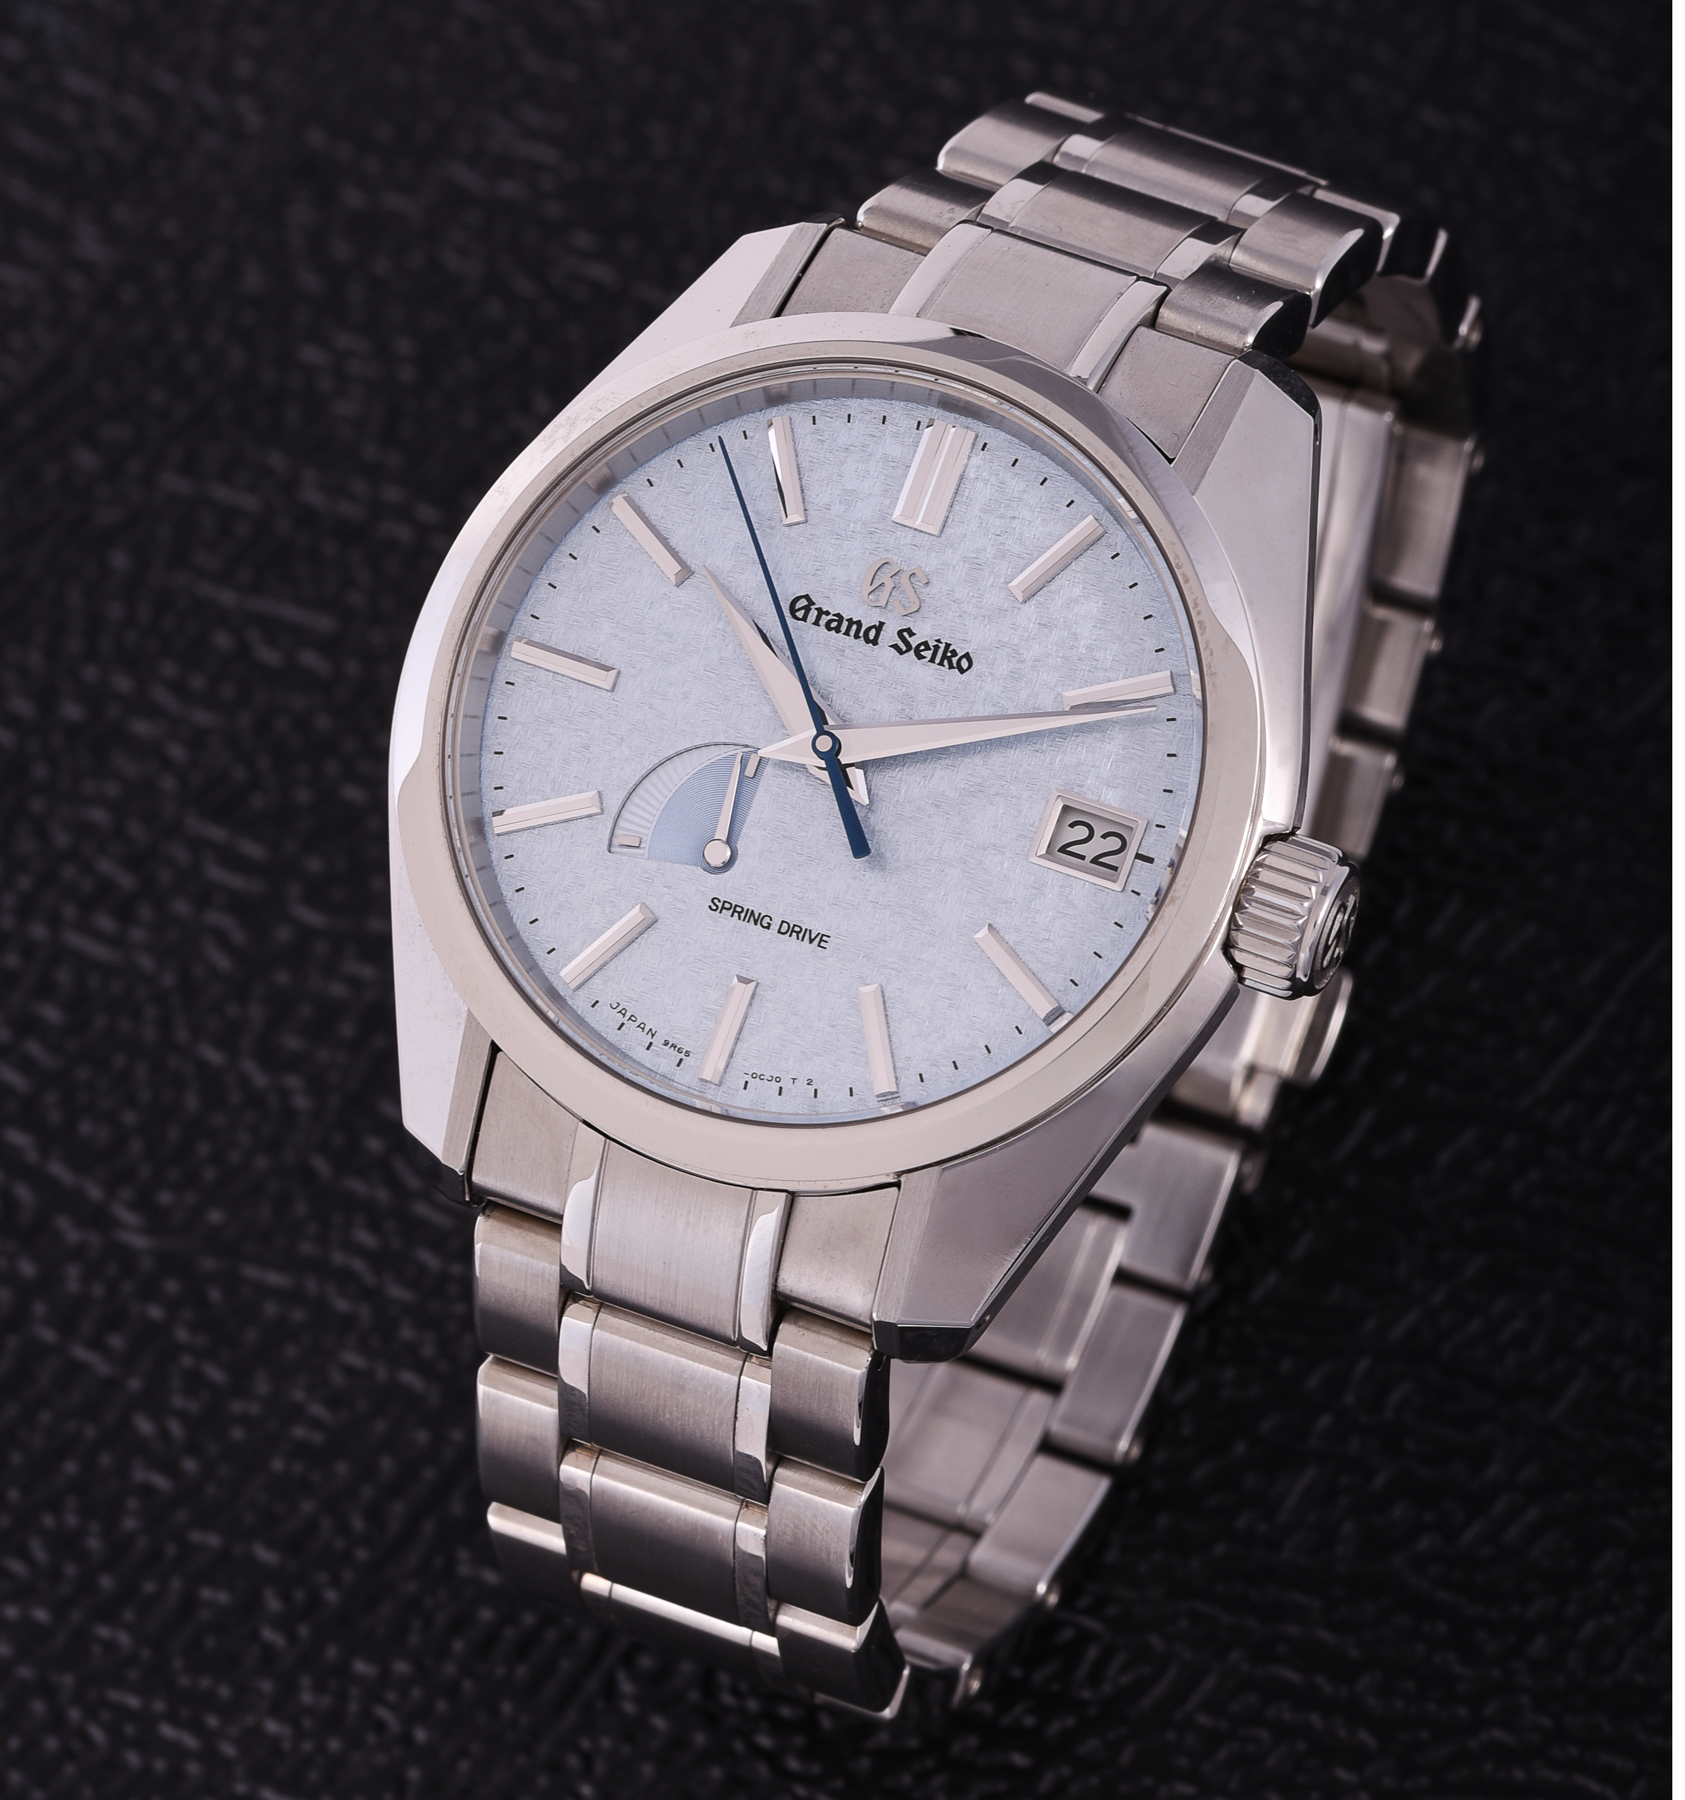 A grand seiko spring drive limited edition stainless steel bracelet watch sold by dreweatts 1759 in november 2021 for 5500 the joint highest sale price for a seiko listed on the saleroom